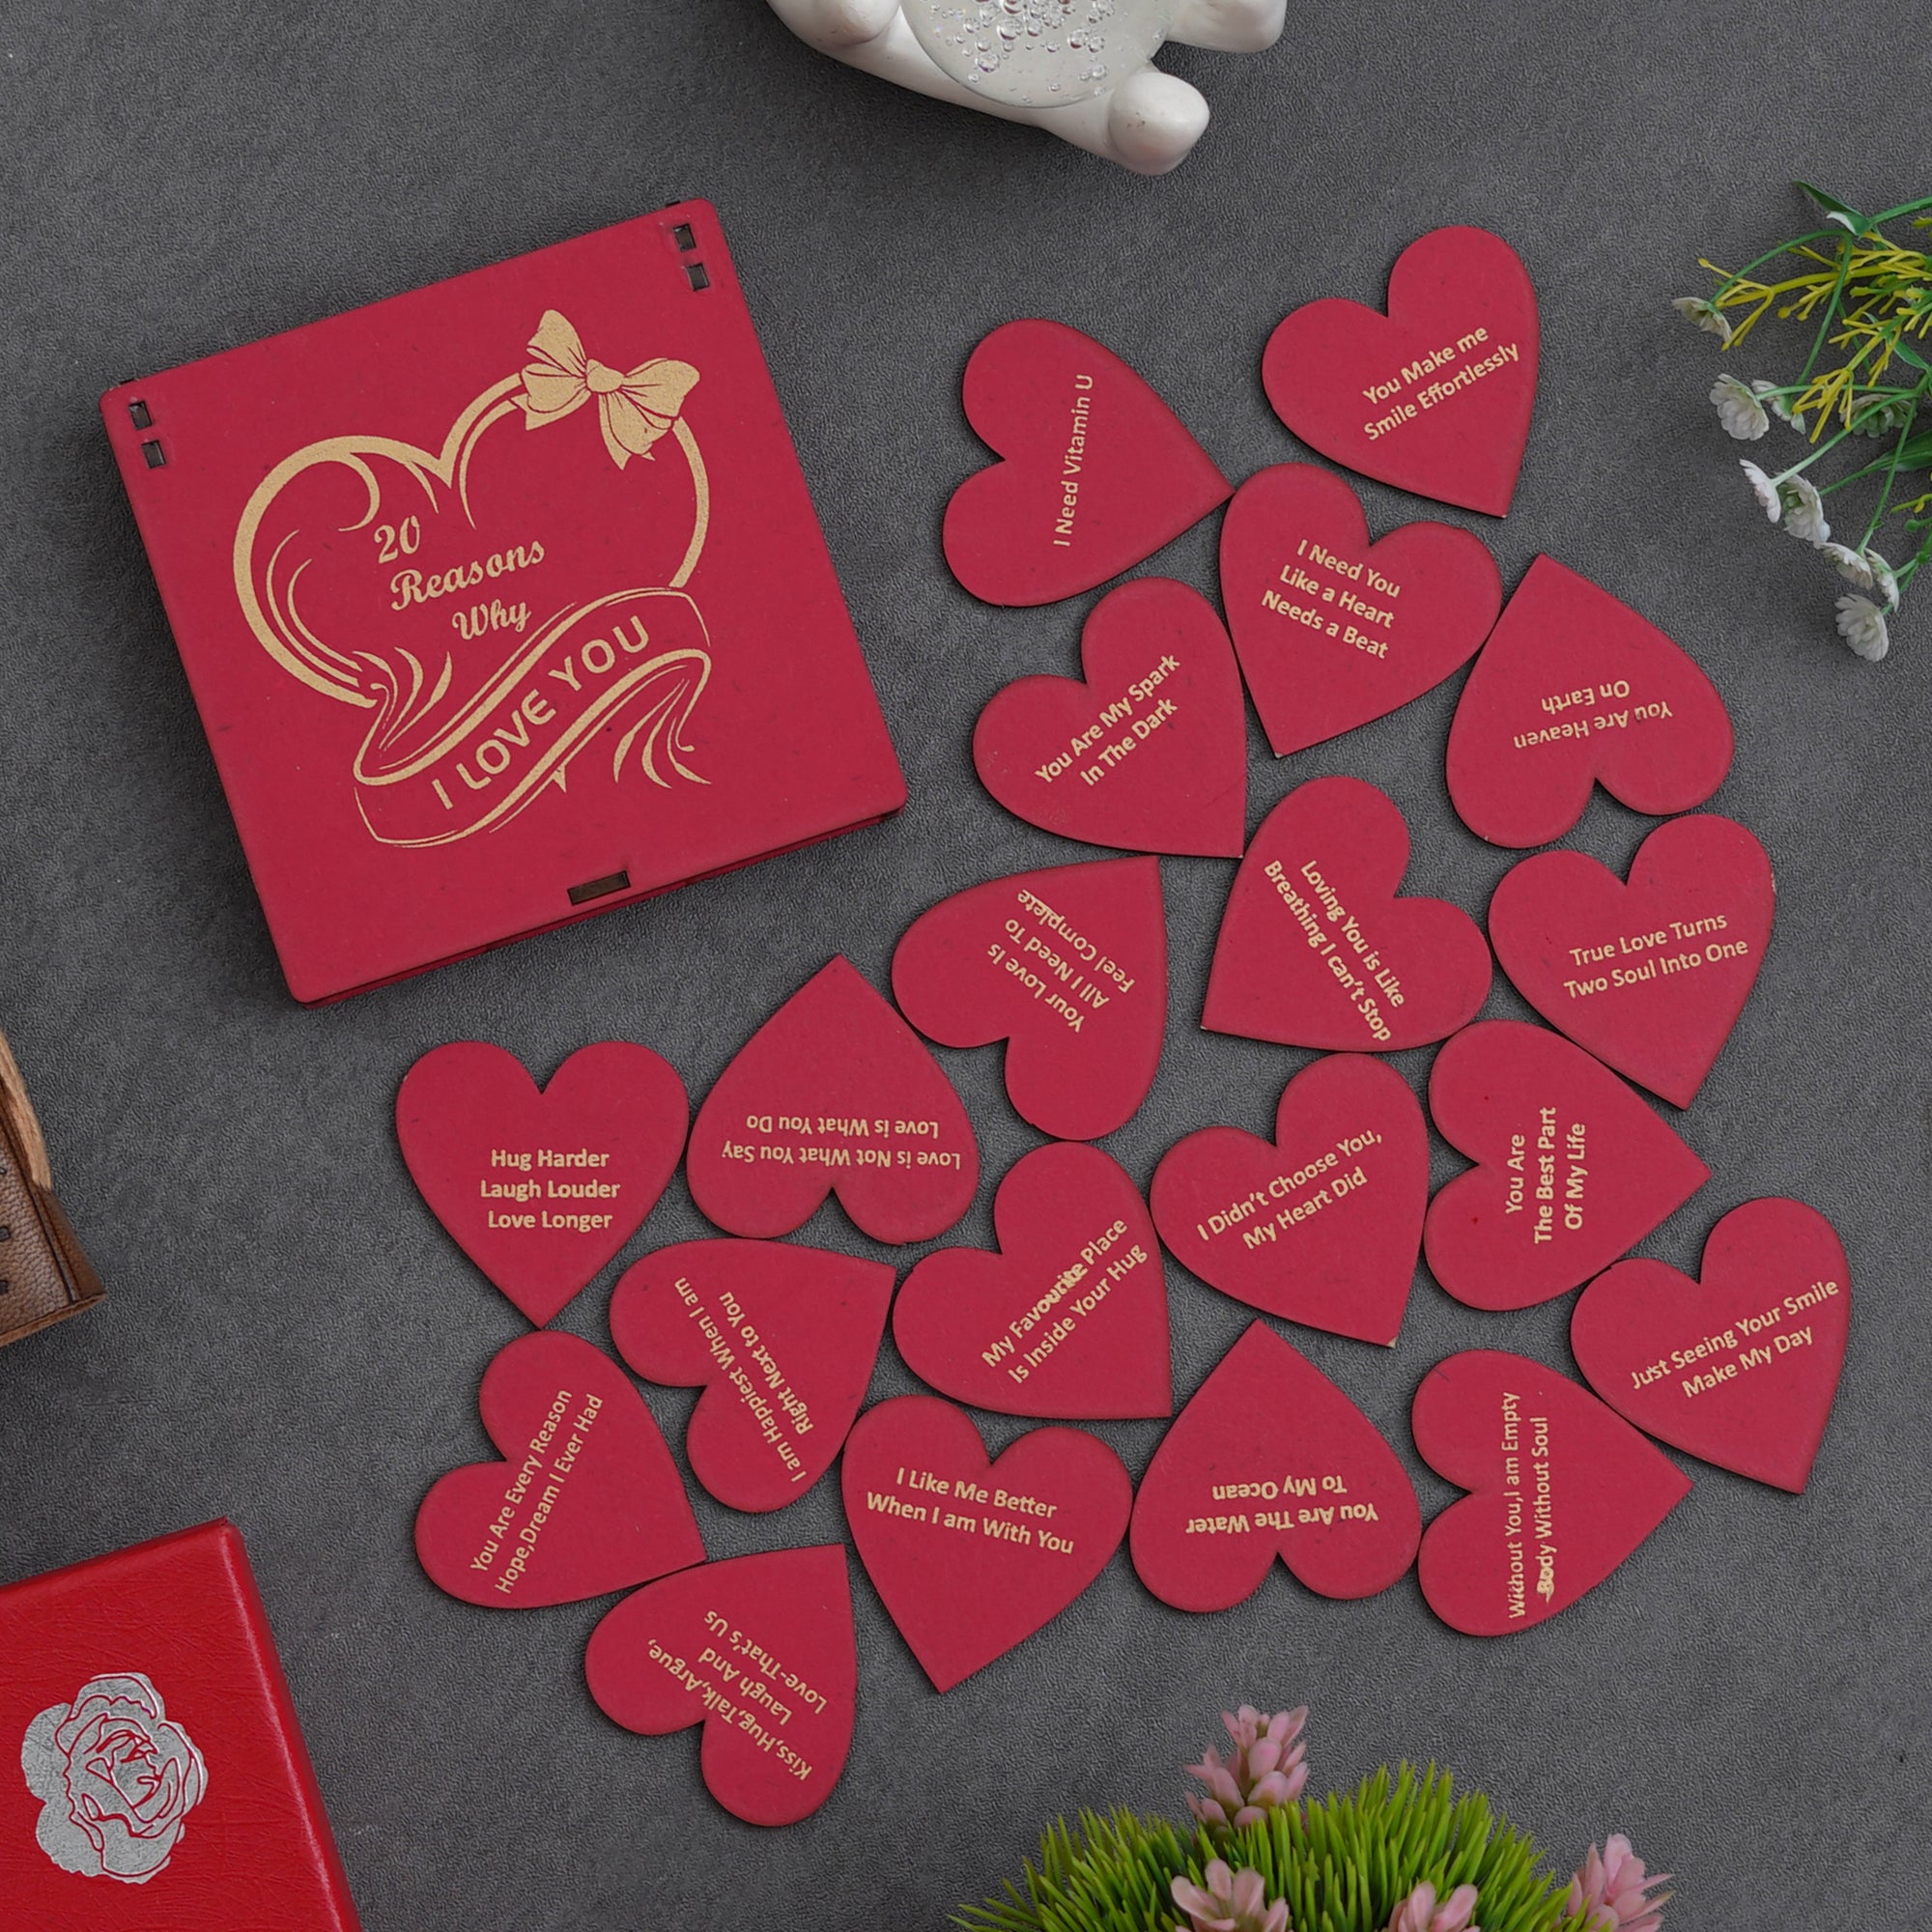 "20 Reasons Why I Love You" Printed on Little Red Hearts Decorative Valentine Wooden Gift Set Box